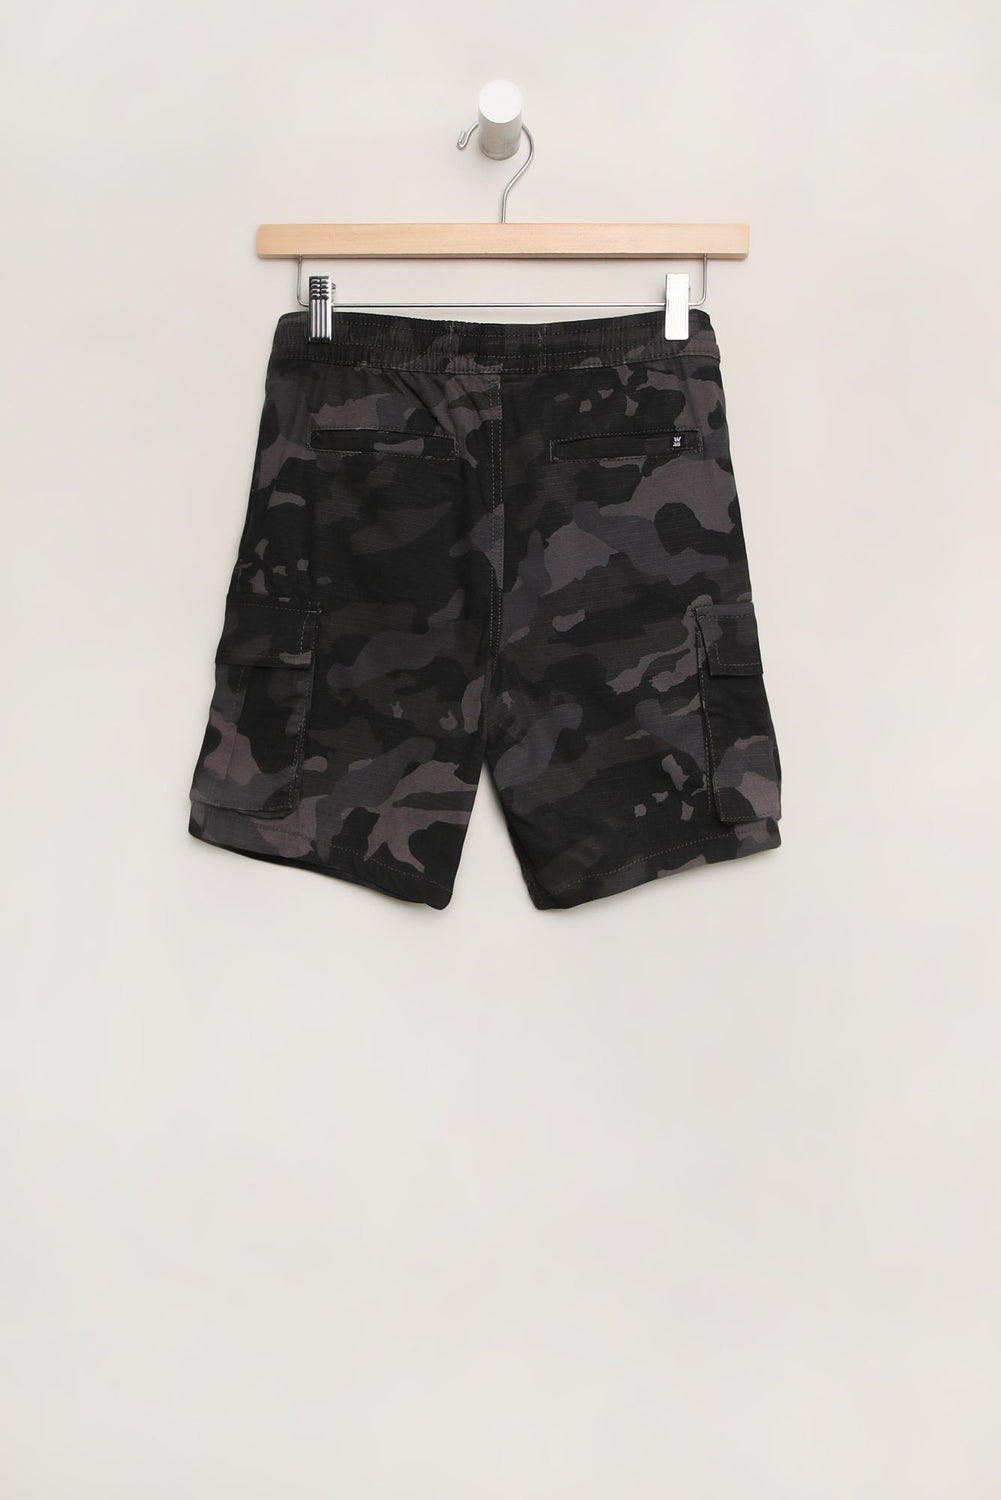 West49 Youth Camo Cargo Jogger Short West49 Youth Camo Cargo Jogger Short